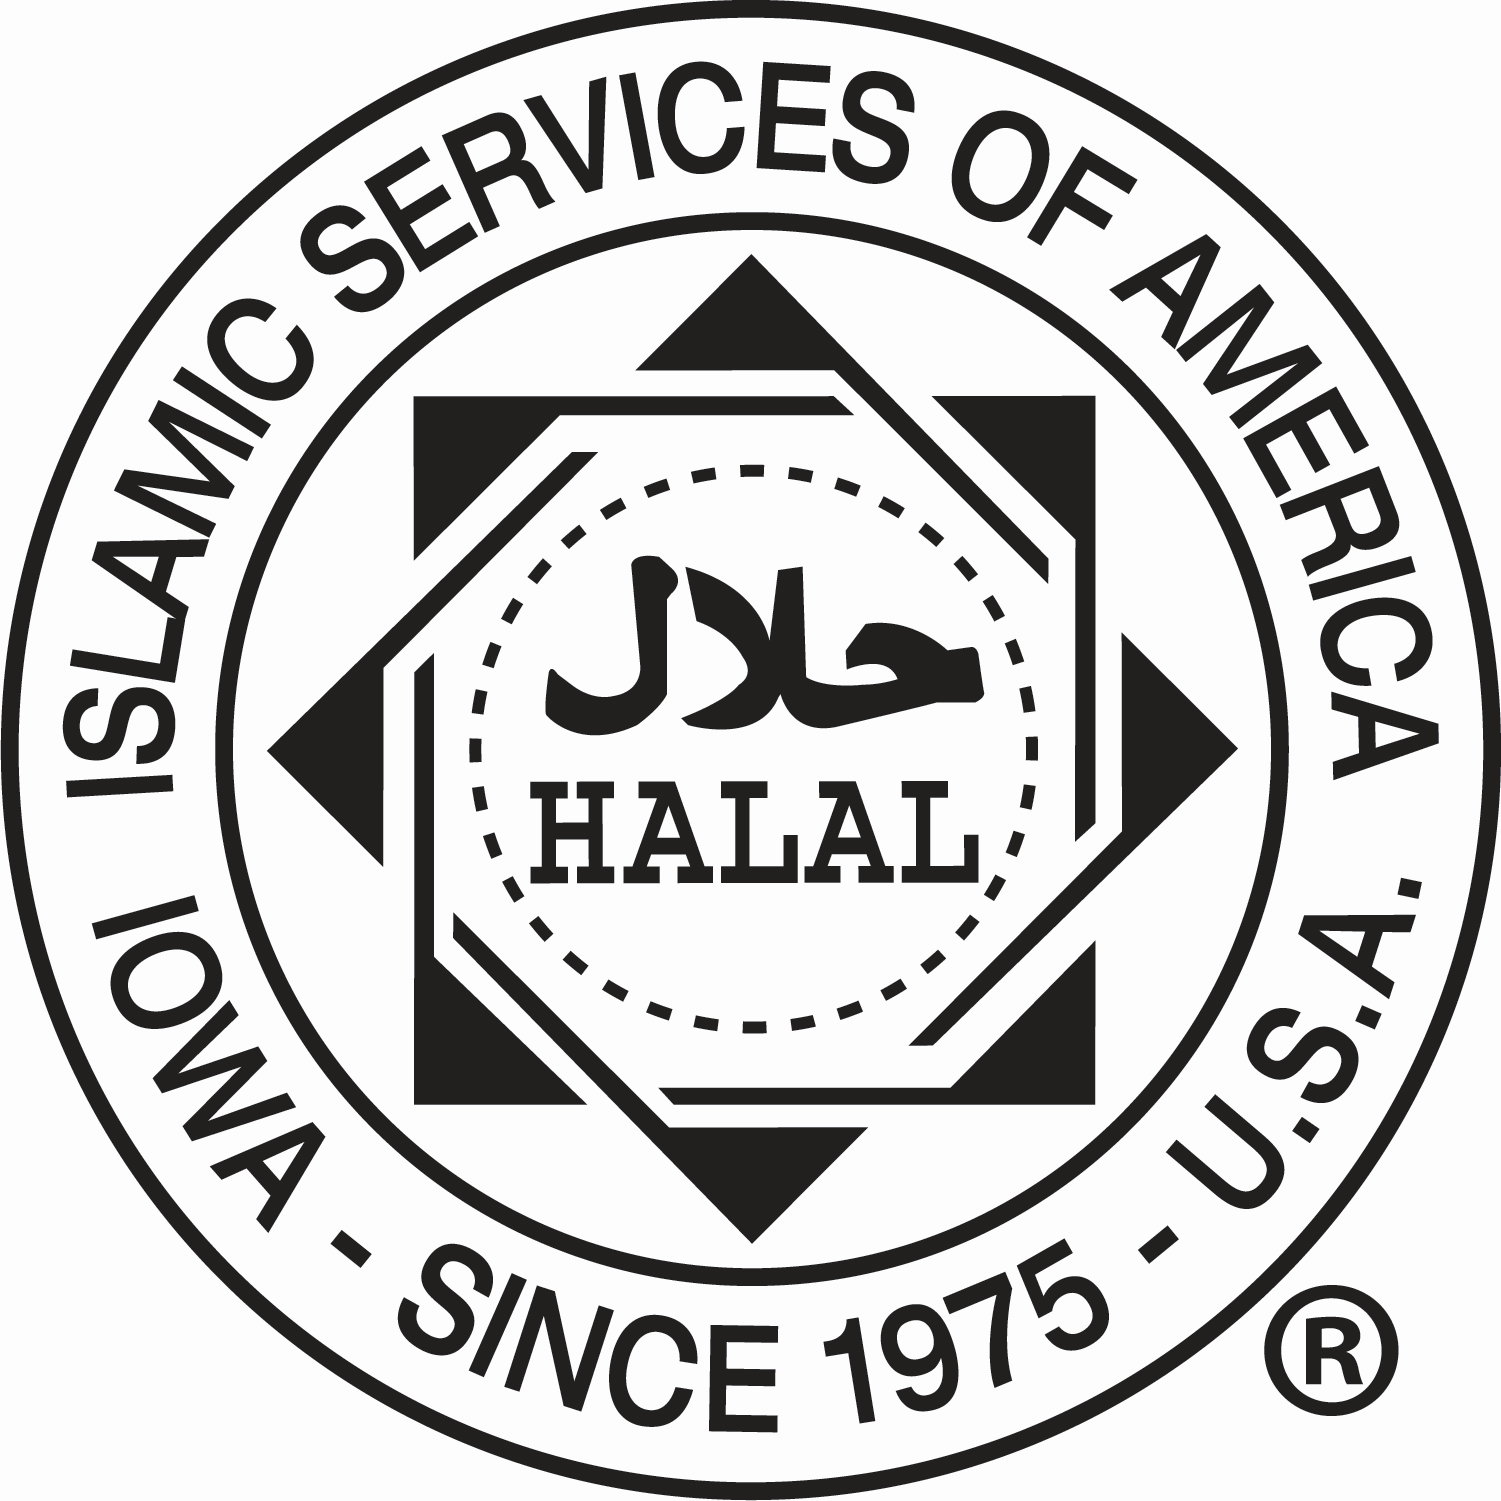 Islamic Services of America's halal-certified seal 2.